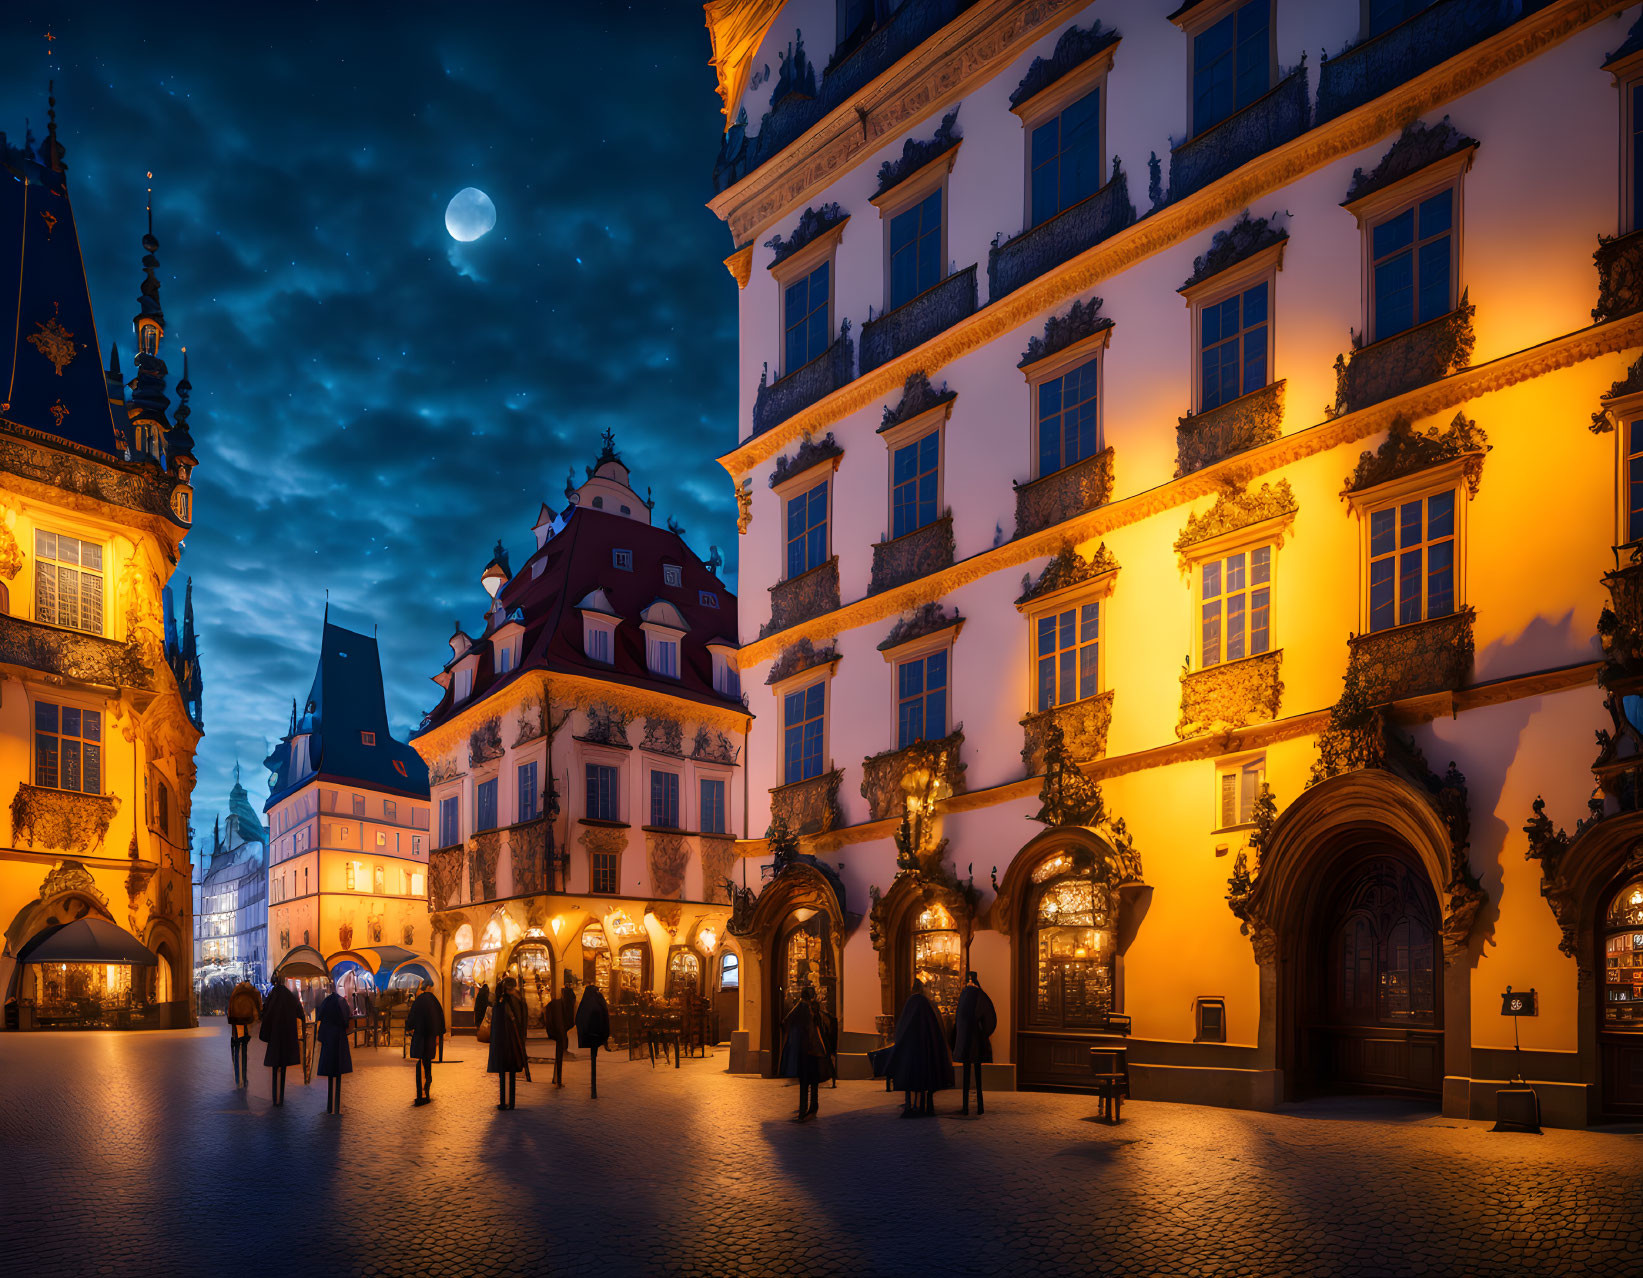 European Town Square Twilight Scene with Classical Architecture and Crescent Moon